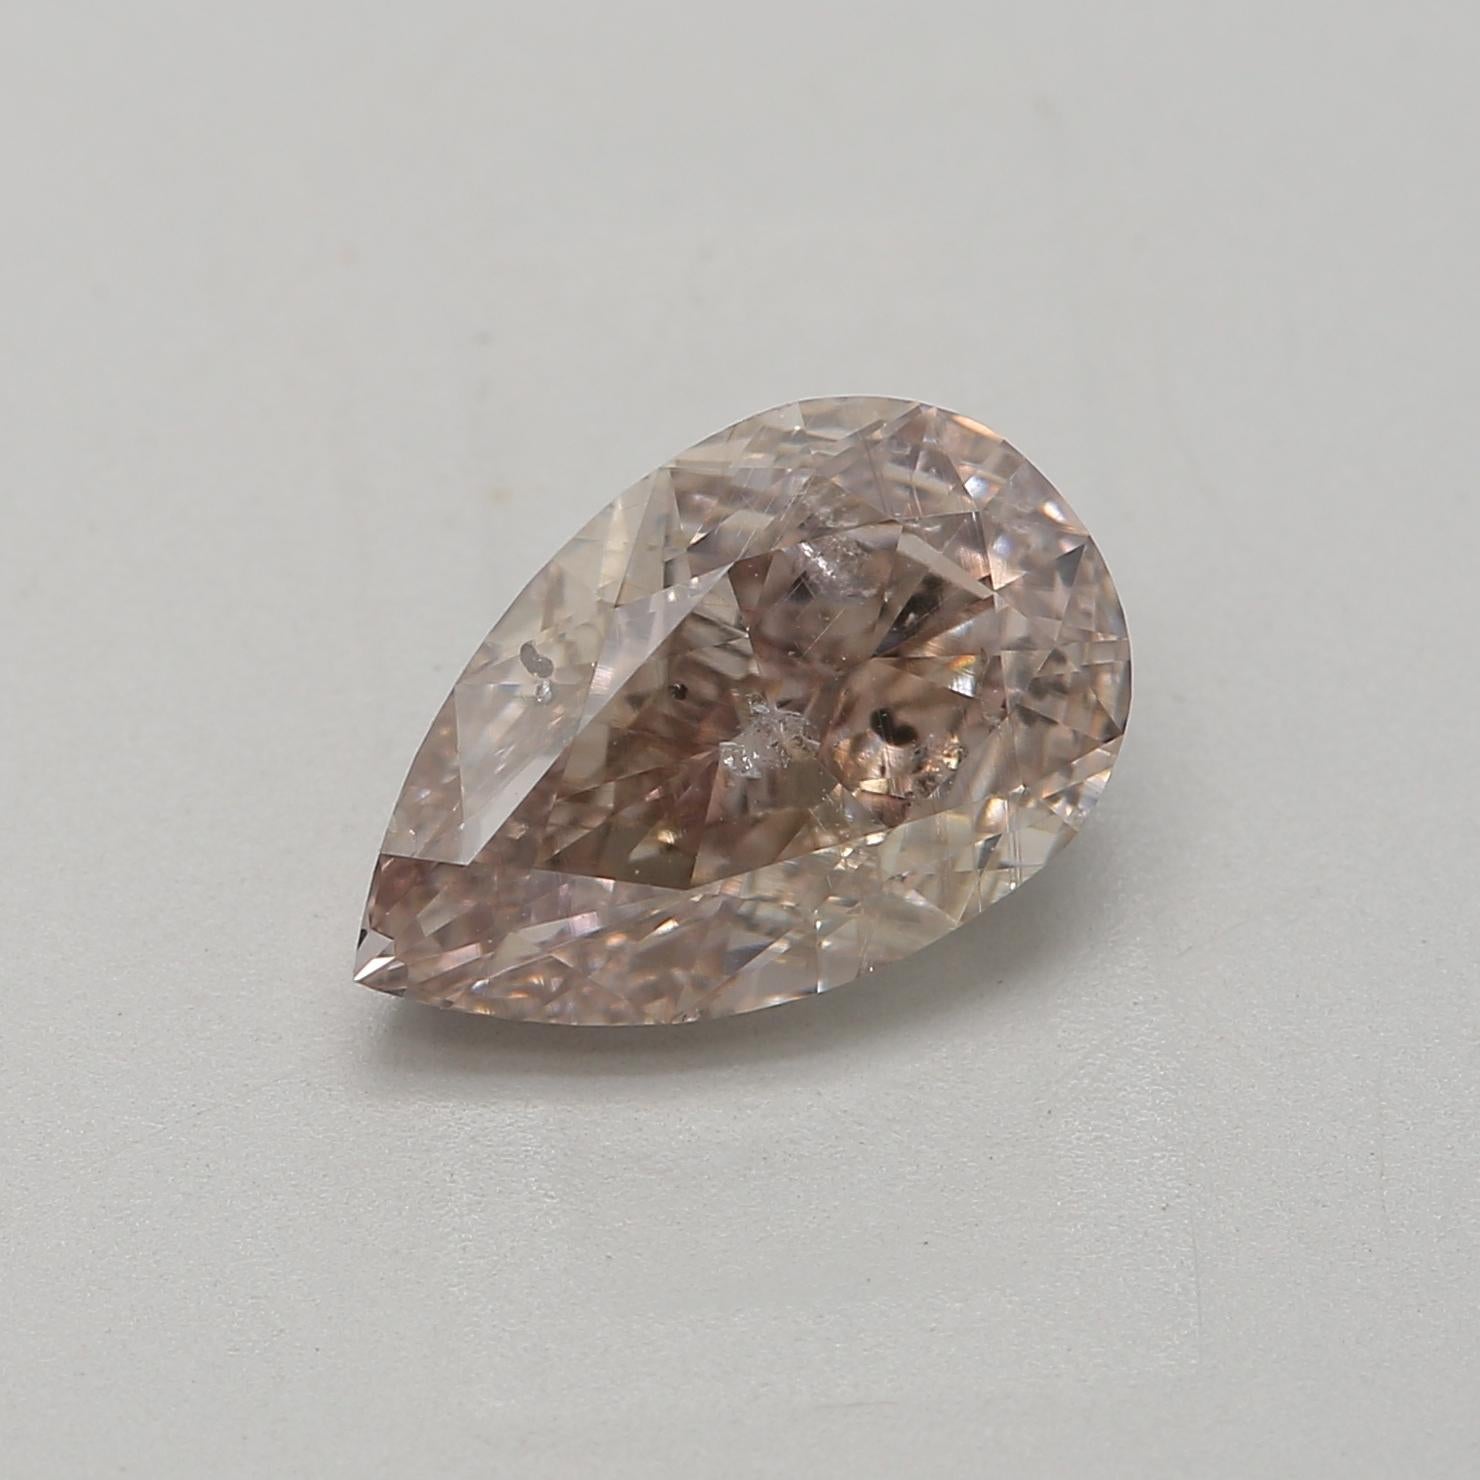 1.32 Carat Fancy Pink Brown Pear cut diamond I1 Clarity GIA Certified For Sale 1